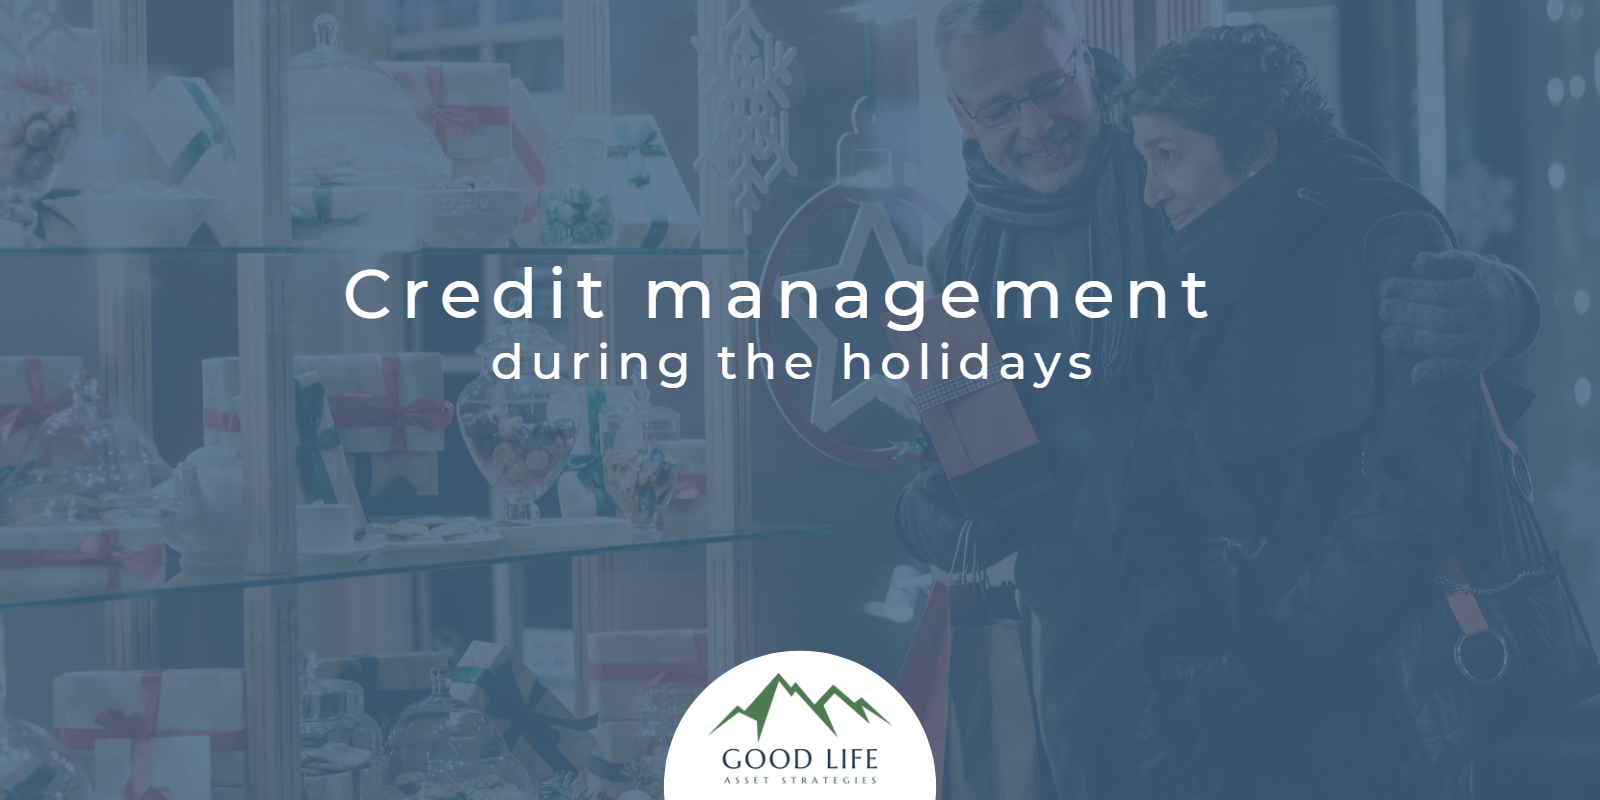 Credit management during the holidays